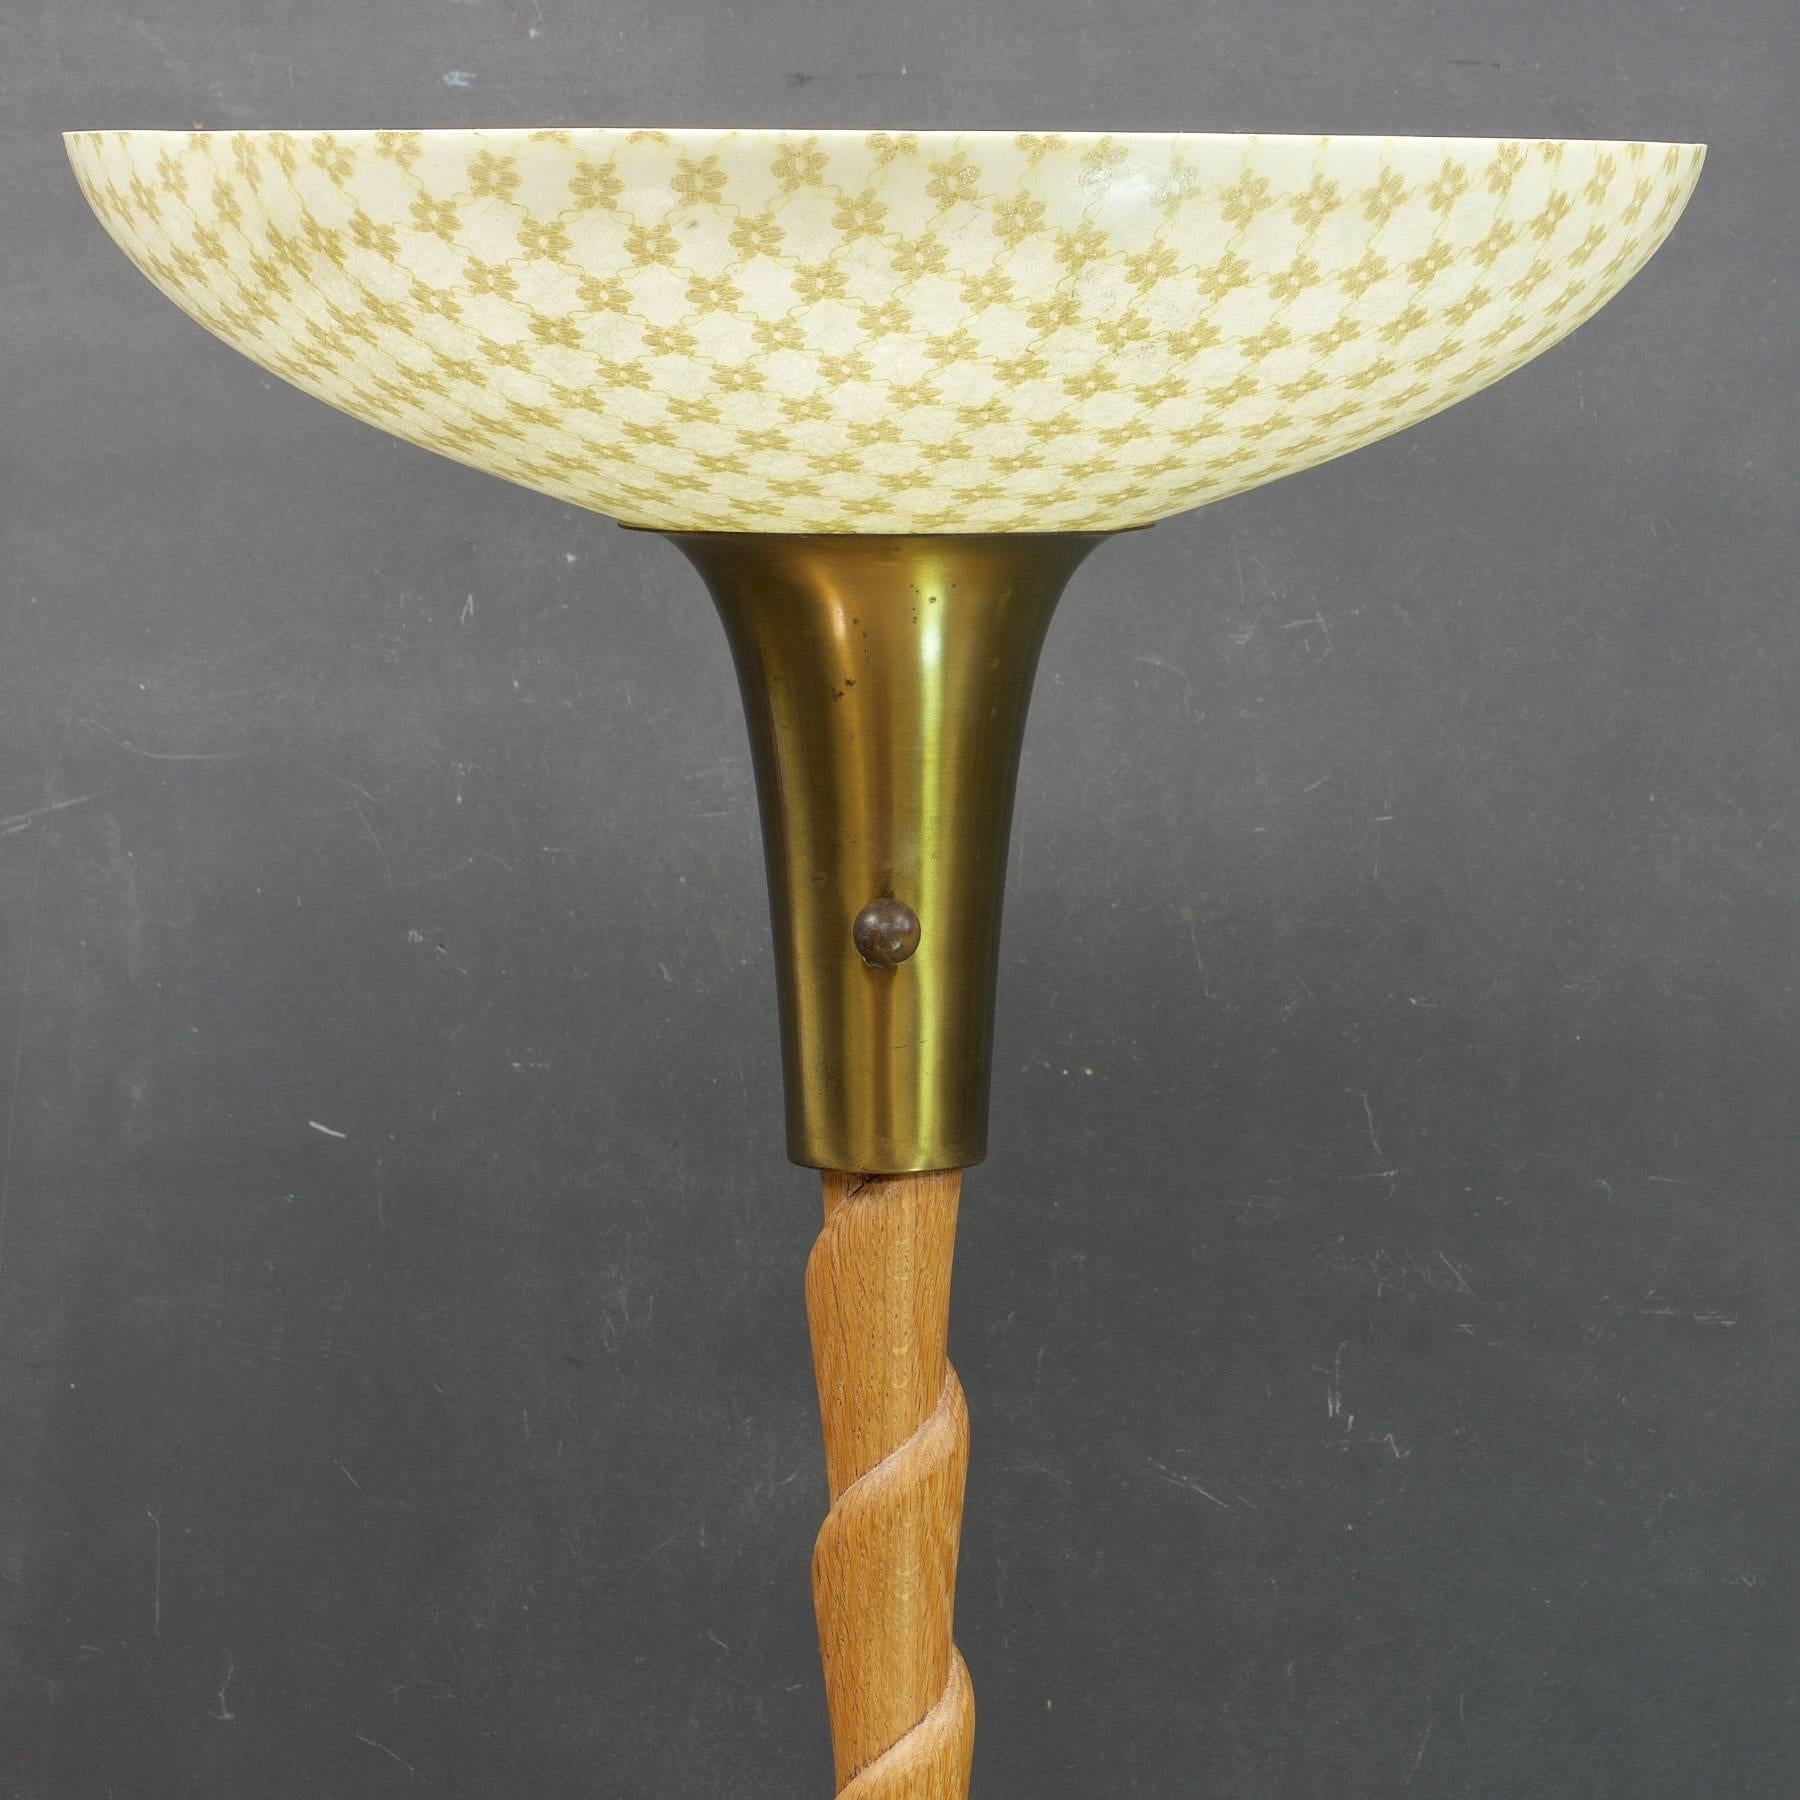 American Art Deco Fiberglass and Twisted Cerused Oak Brass Torchiere Floor Lamp For Sale